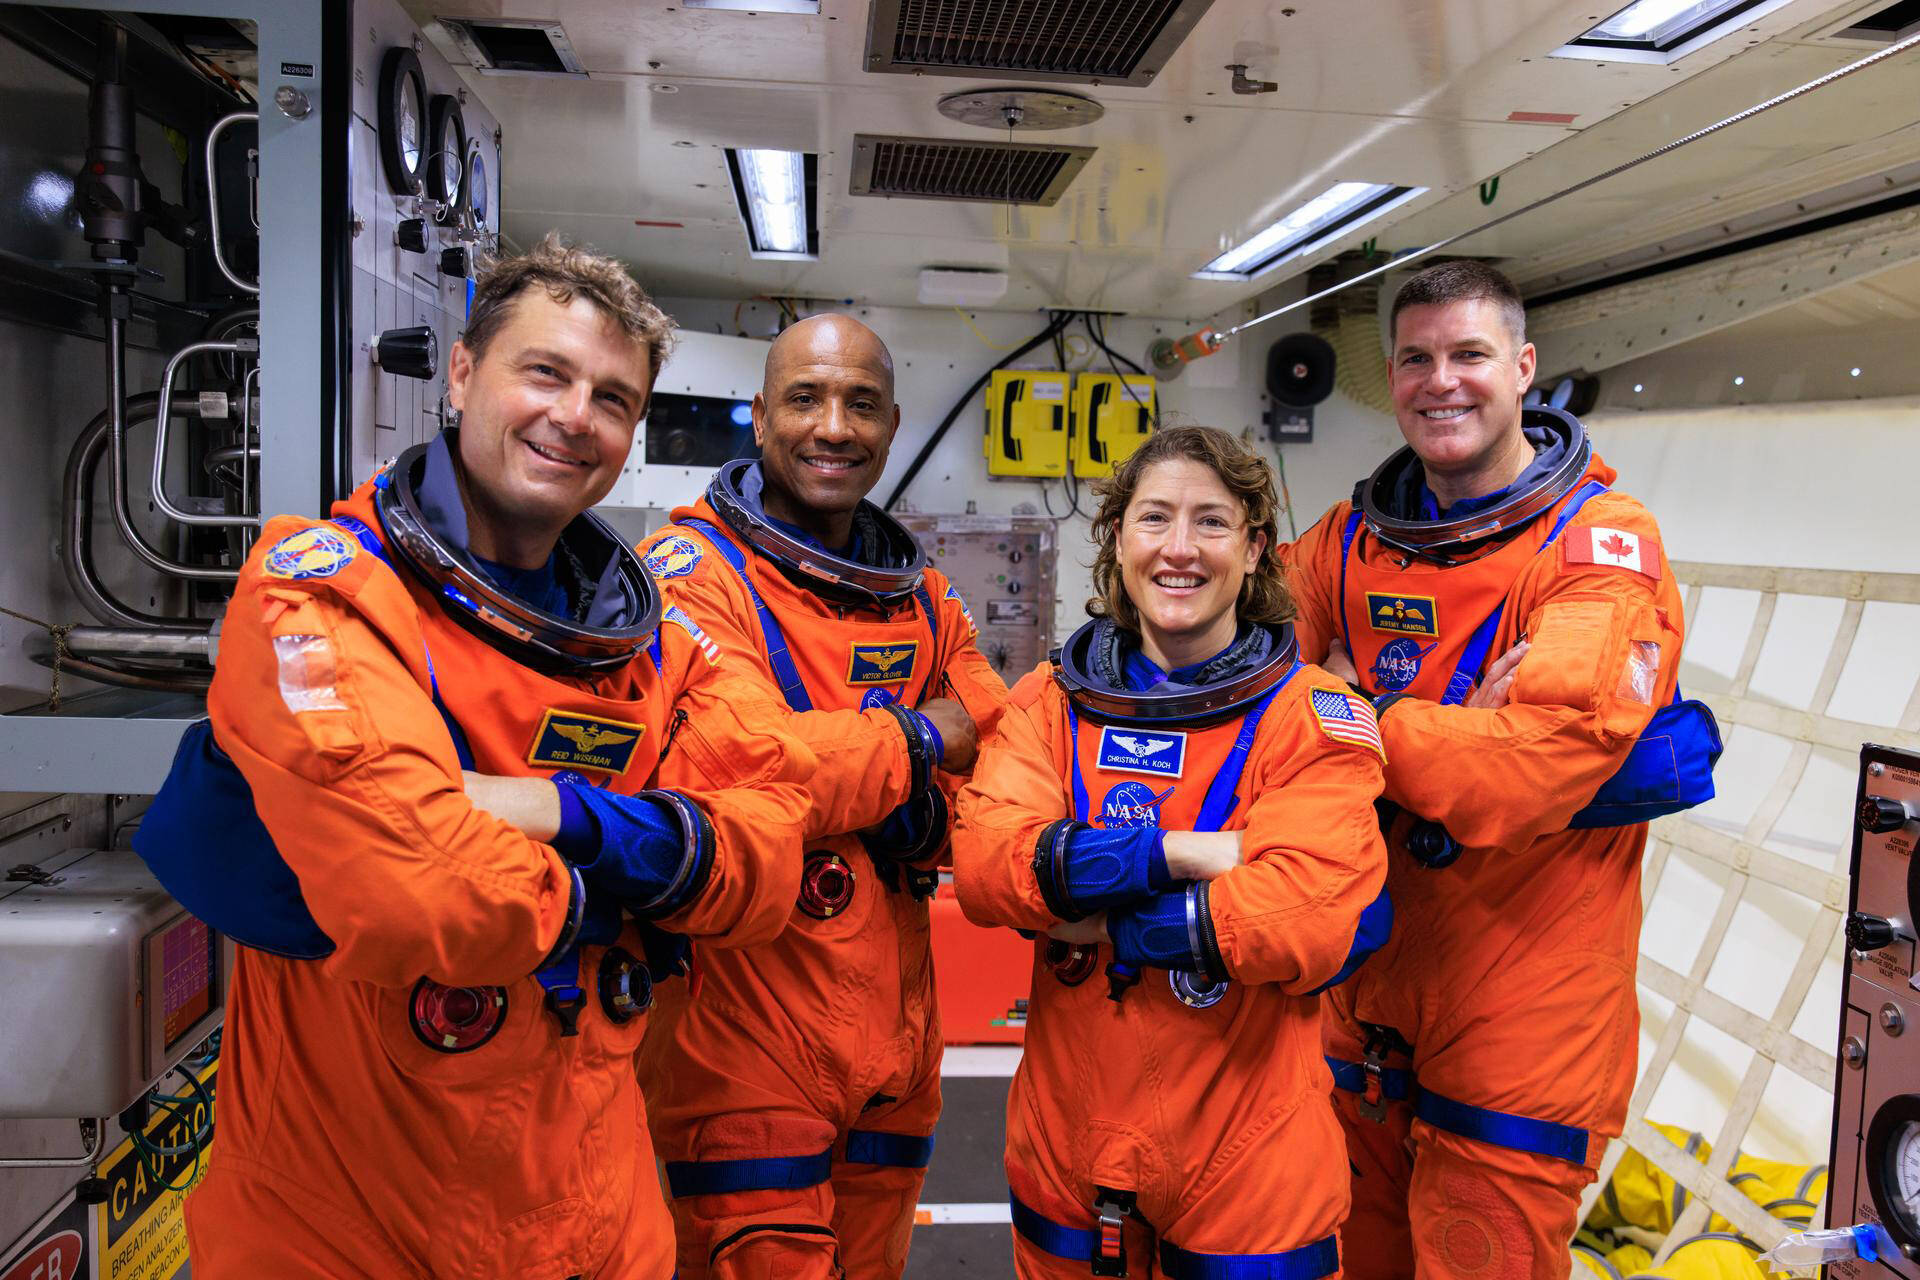 This photo provided by NASA shows, from left, Reid Wiseman, Victor Glover, and Christina Koch, and CSA (Canadian Space Agency) astronaut Jeremy Hansen during a test at Kennedy Space Center in Florida on Wednesday, Sept. 20, 2023. NASA kicked off 2023 by introducing the four astronauts who are slated to fly around the moon in late 2024. The second crew, still unidentified, will actually land. (NASA via AP)